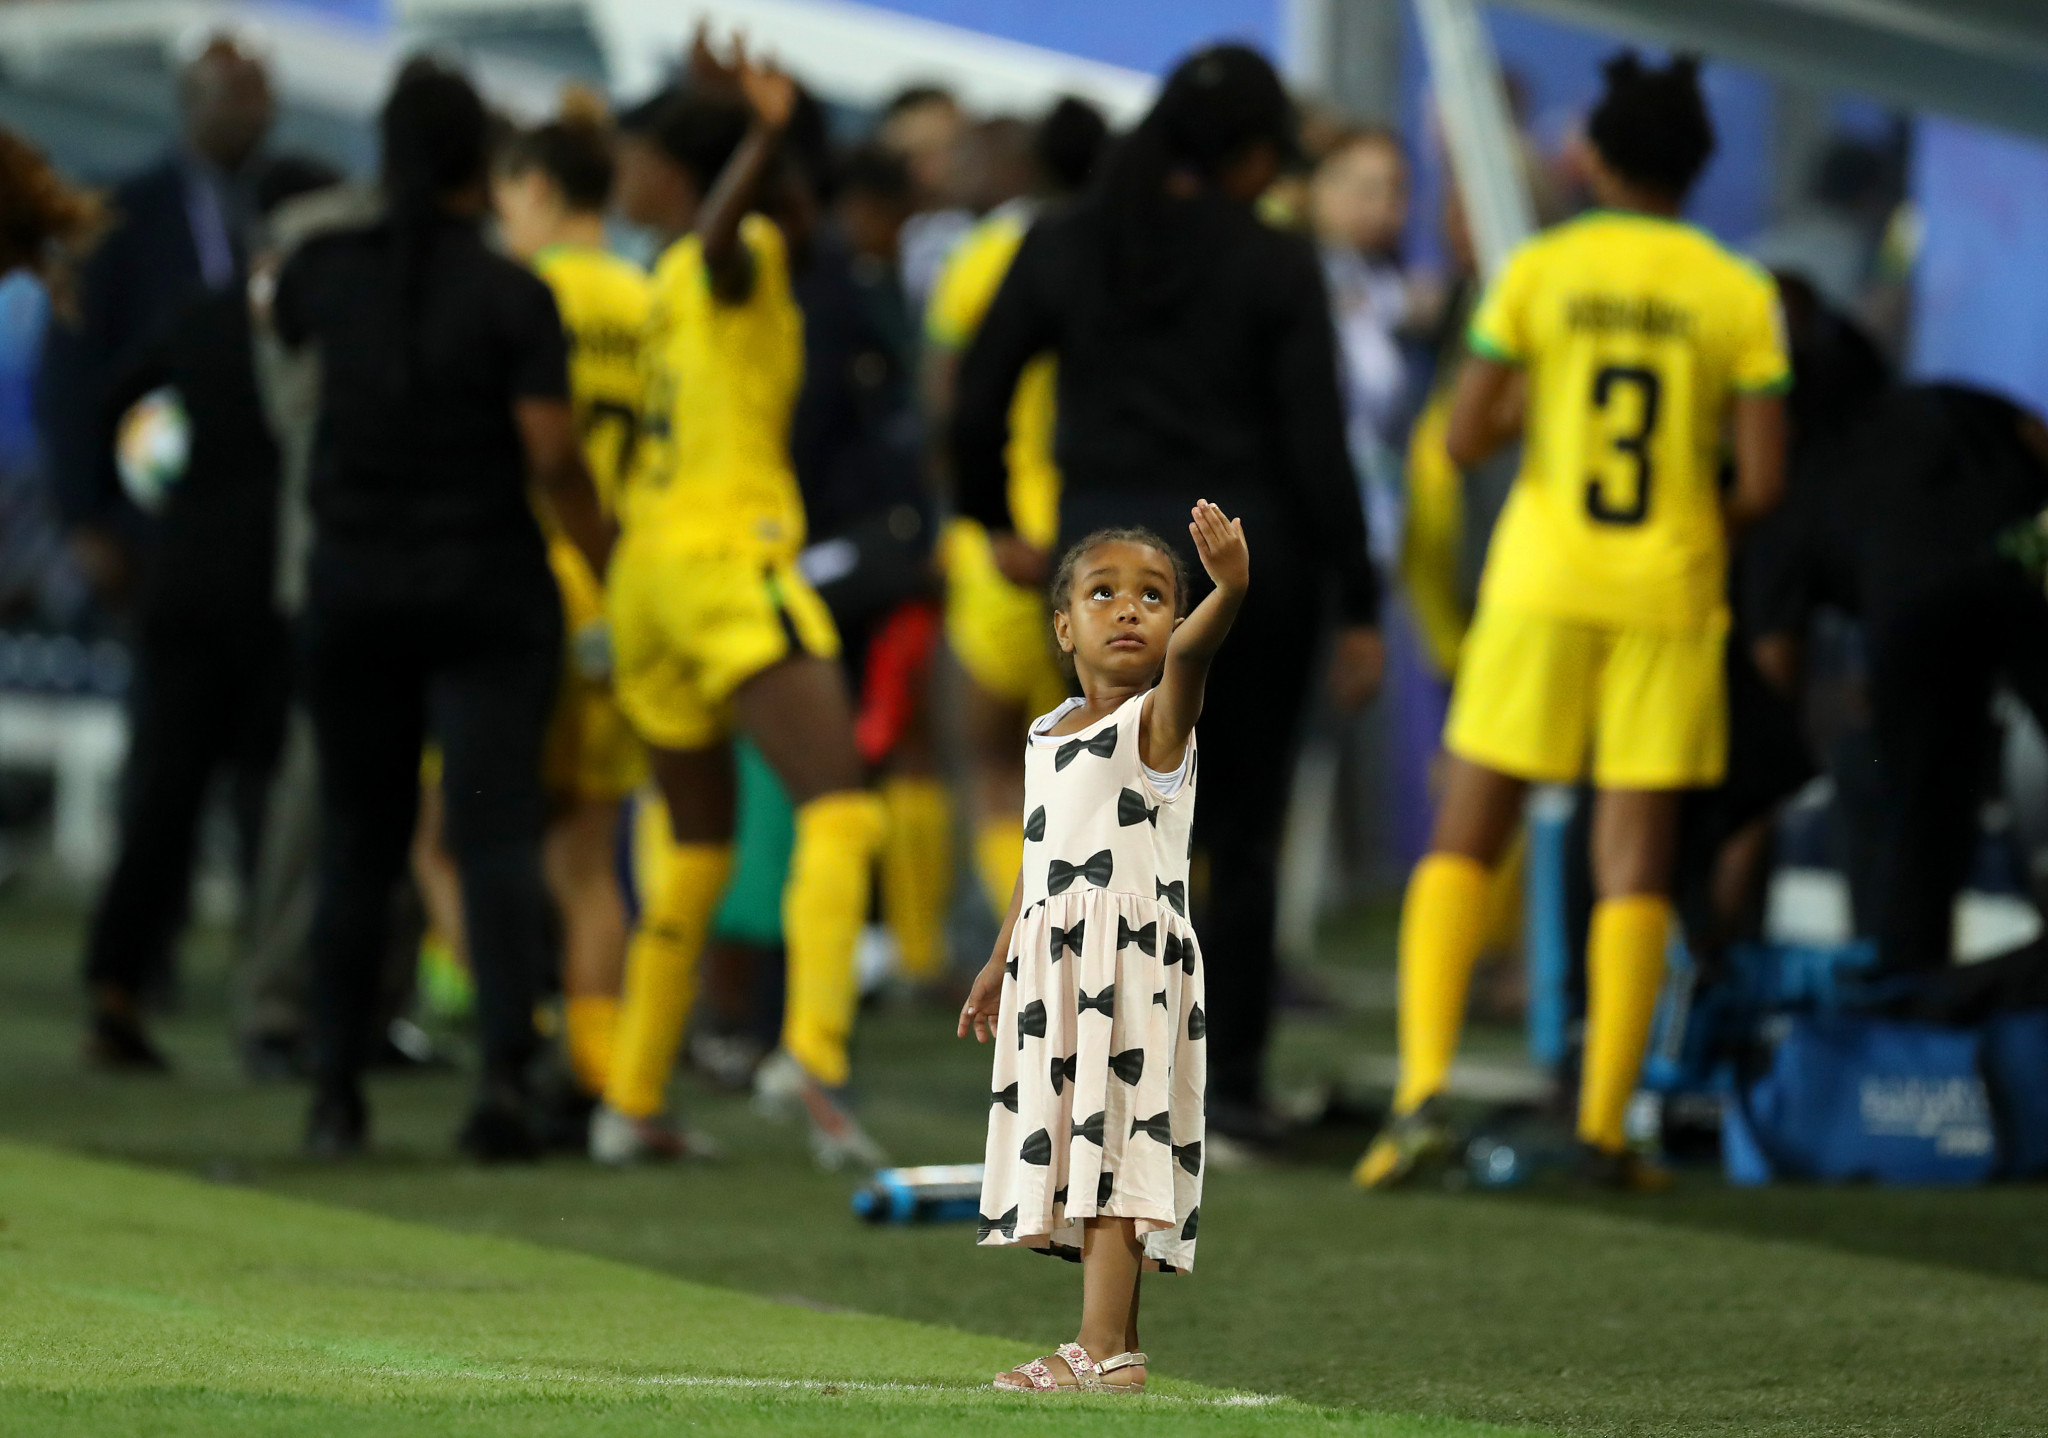 A child dances on the sidelines following Australia's victory over Jamaica ©Getty Images